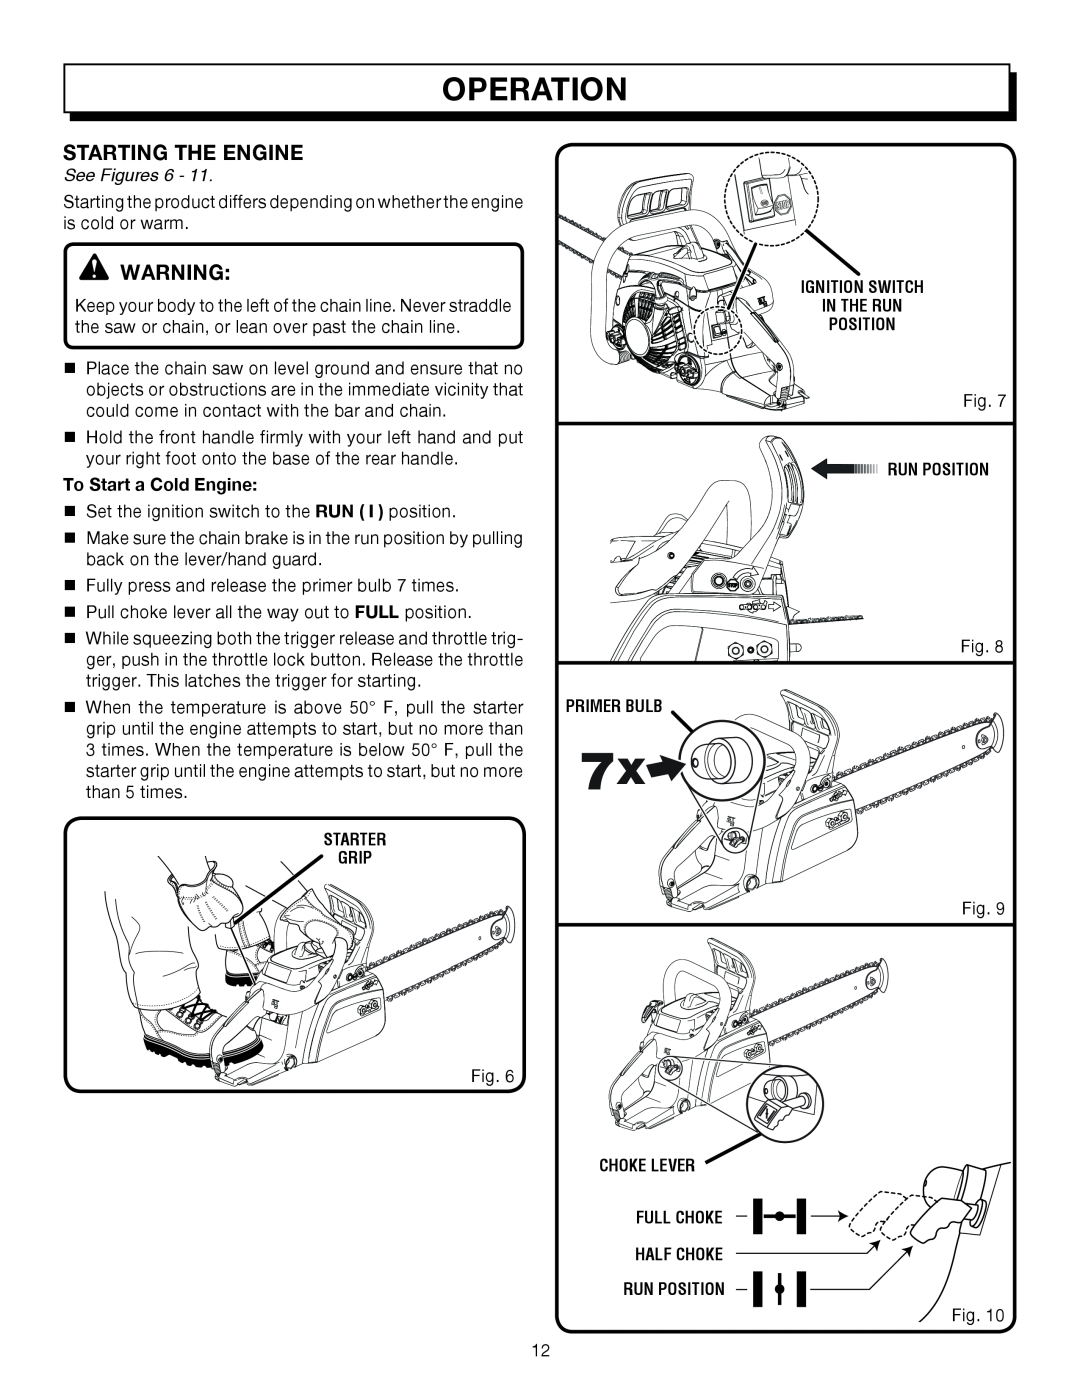 Homelite UT10032 manual Operation, See Figures 6, To Start a Cold Engine, Starter Grip, Ignition Switch In The Run Position 